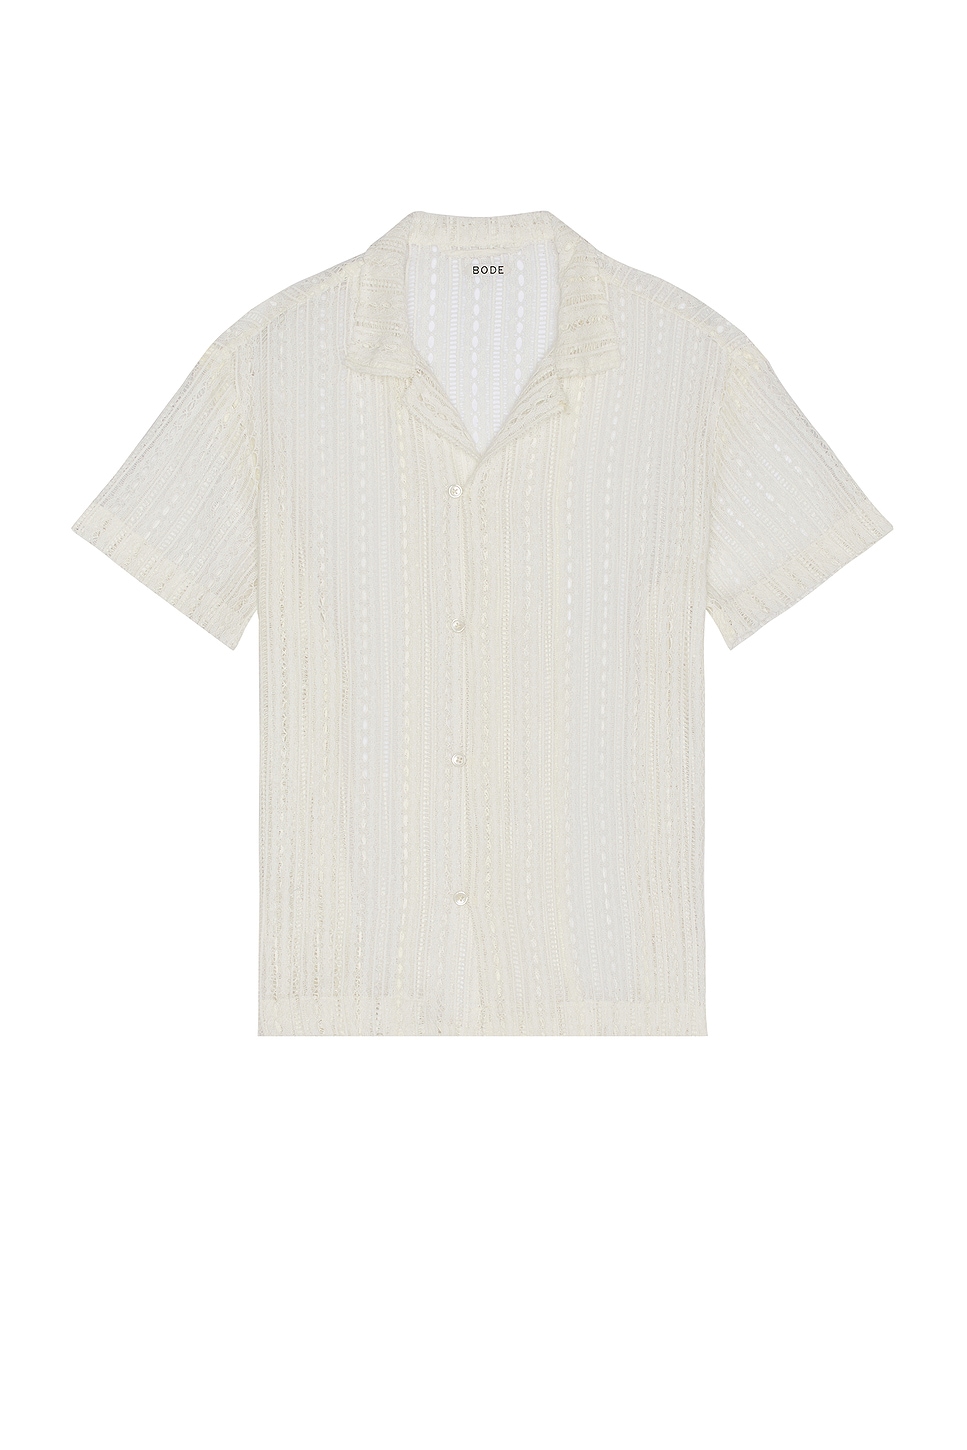 Image 1 of BODE Meandering Lace Short Sleeve Shirt in Natural